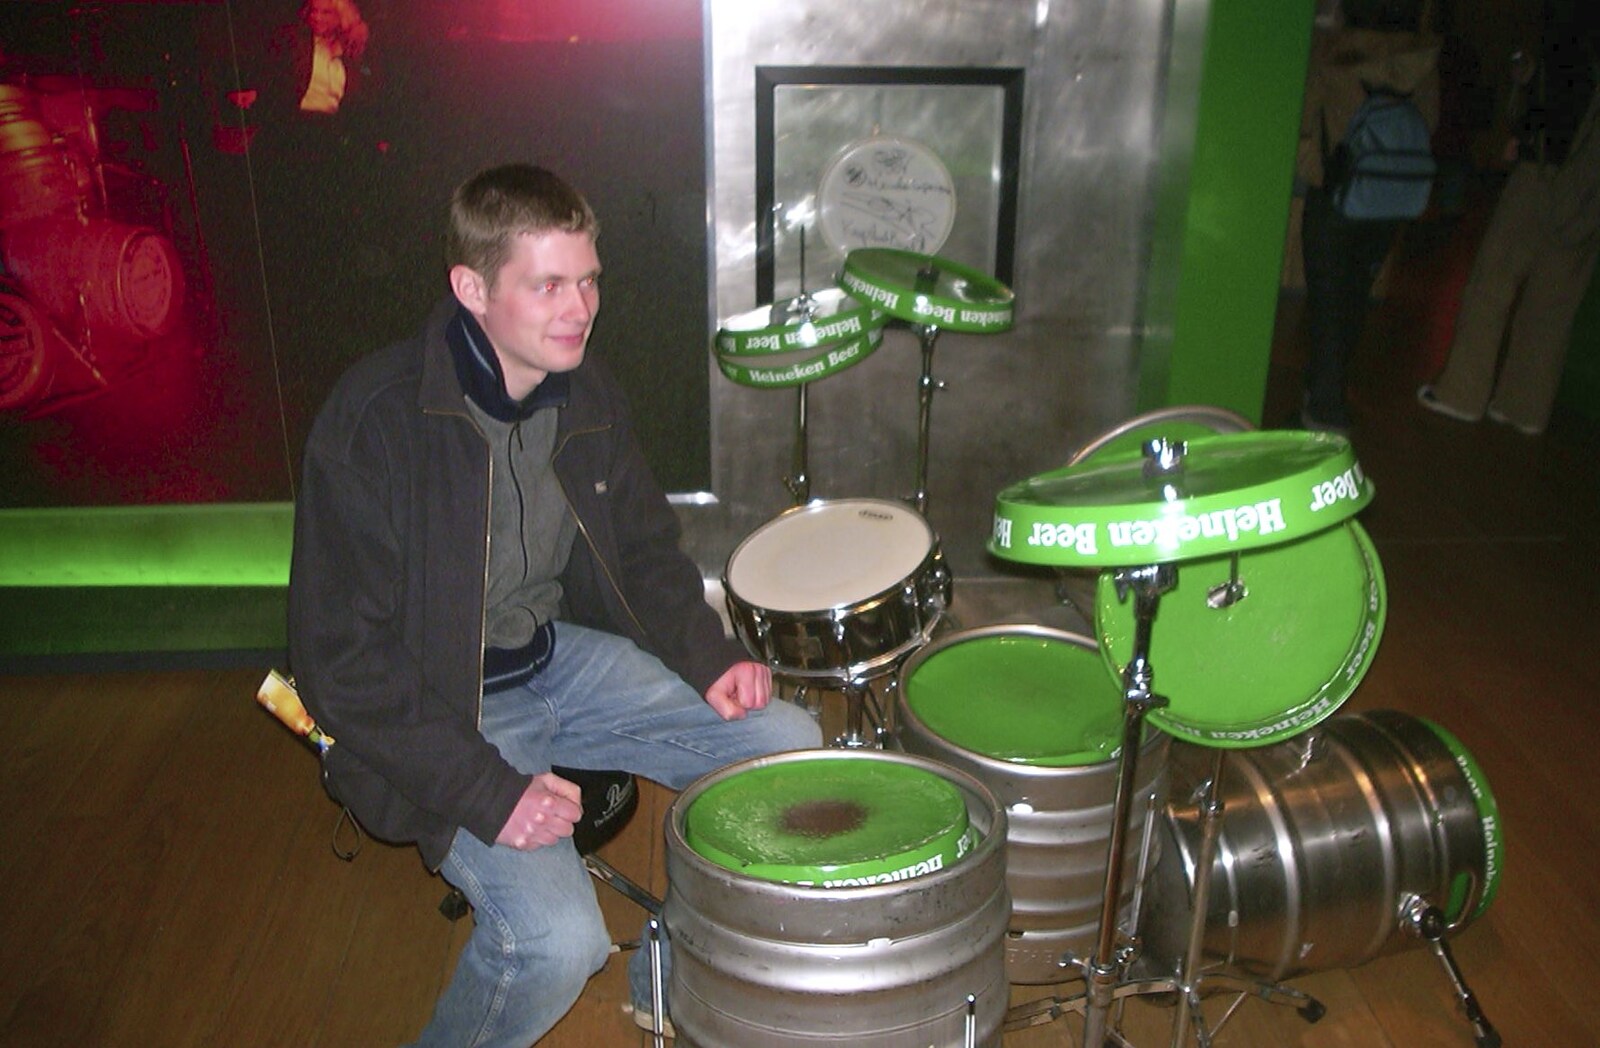 Phil on a Heineken drum kit from Anne Frank, Markets and Mikey-P's Stag Do, Amsterdam, Netherlands - 6th March 2004